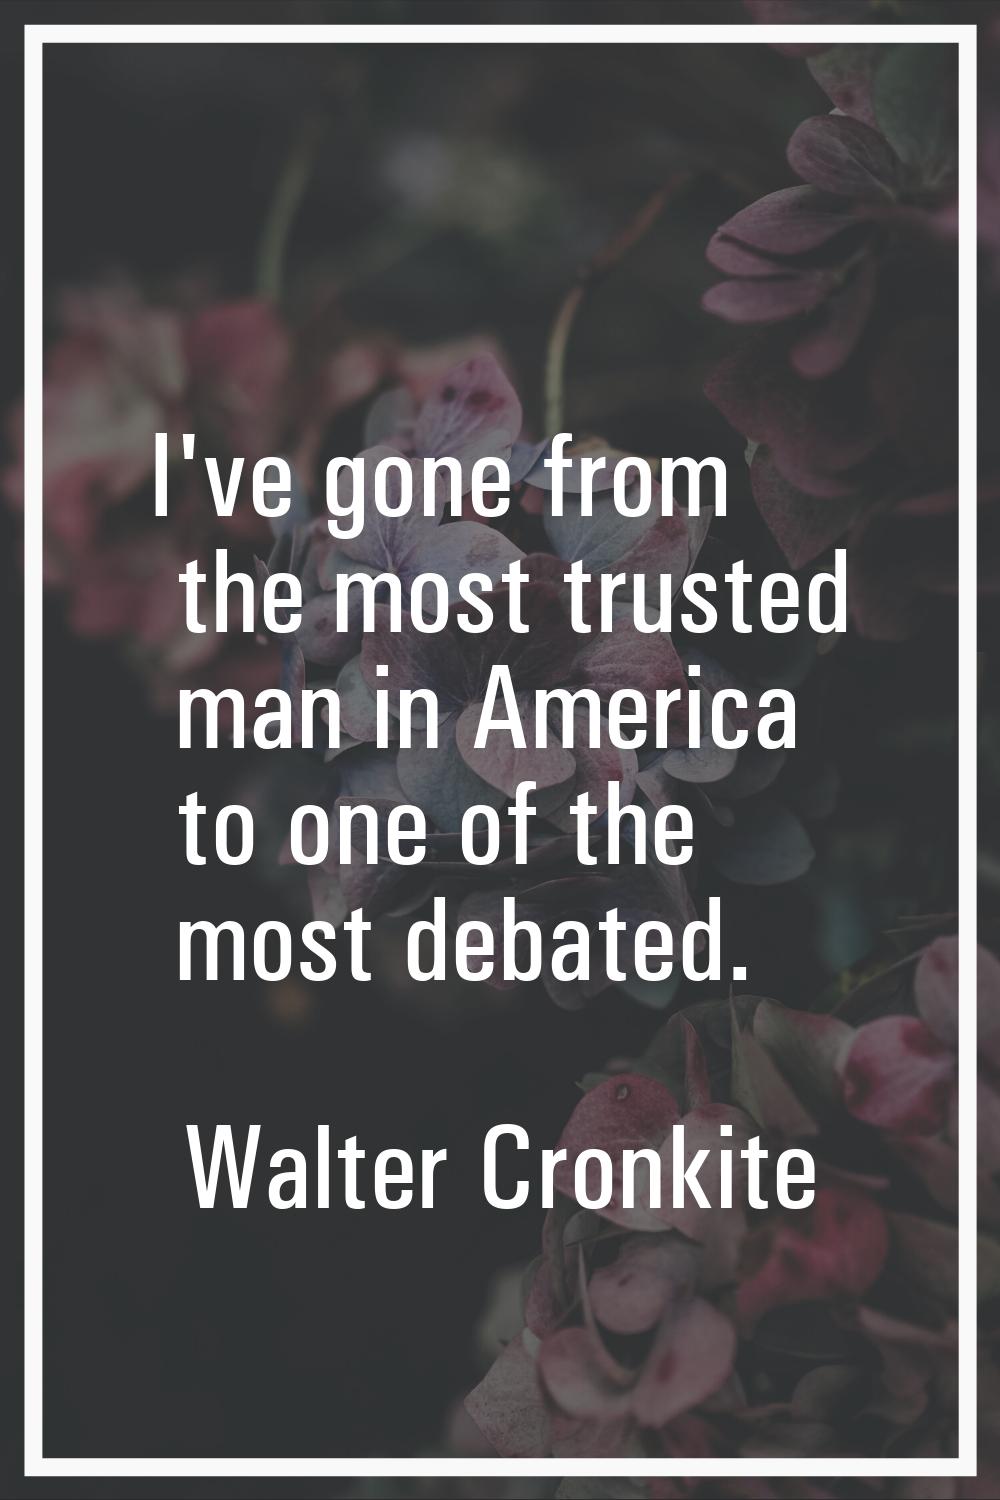 I've gone from the most trusted man in America to one of the most debated.